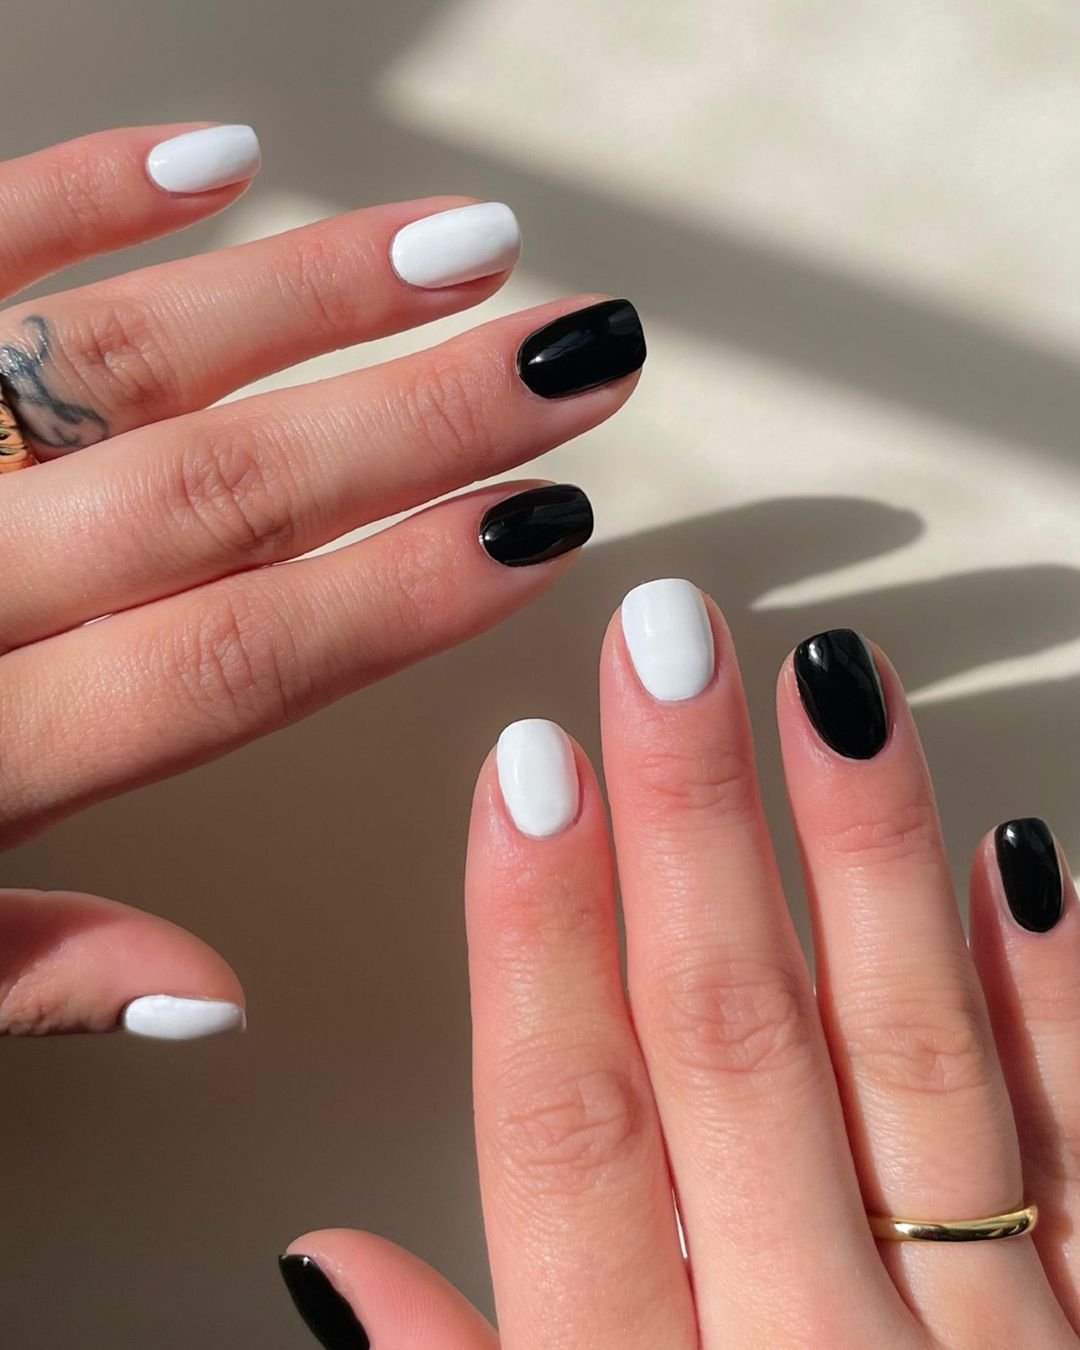 17 - Picture of Black and White Nails